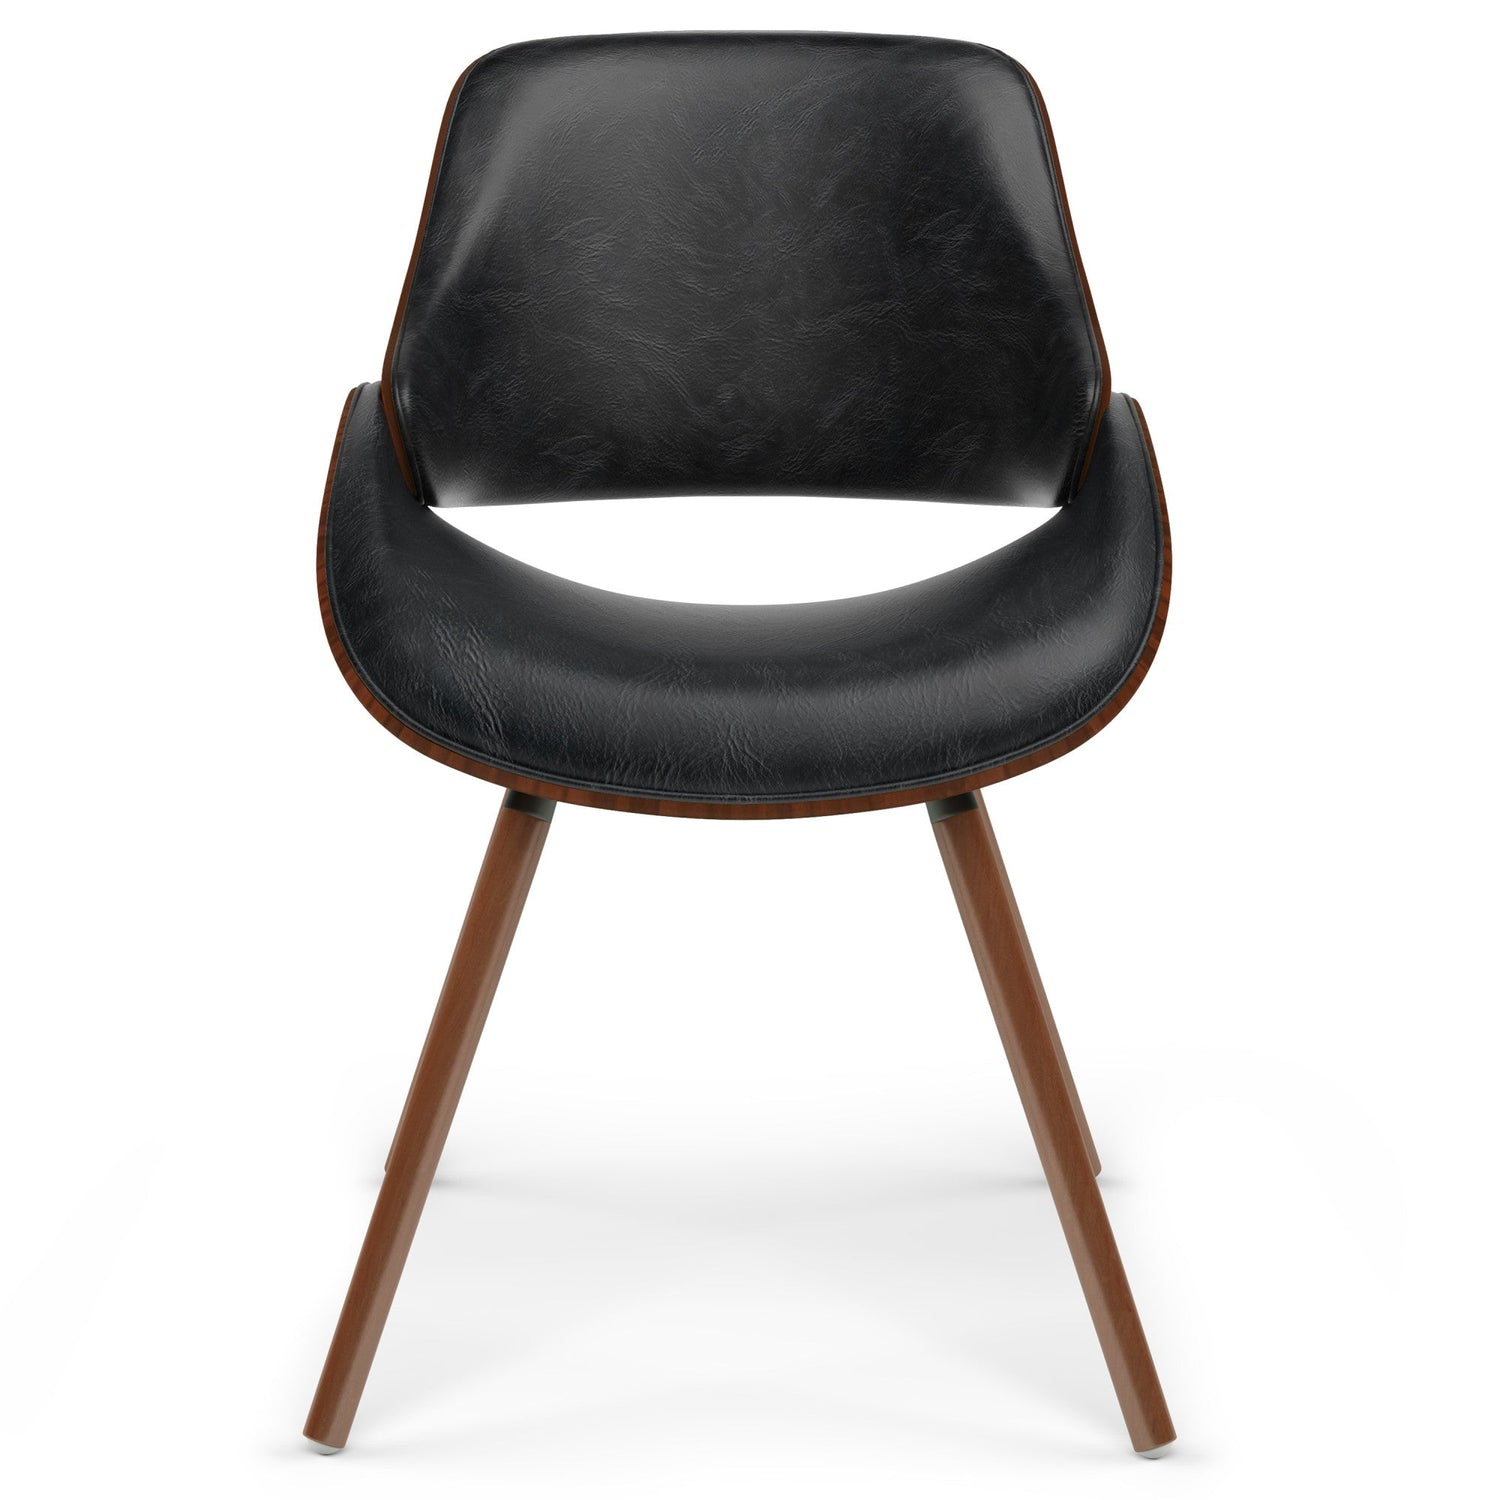 Distressed Black Walnut Distressed Vegan Leather | Malden Bentwood Dining Chair with Wood Back